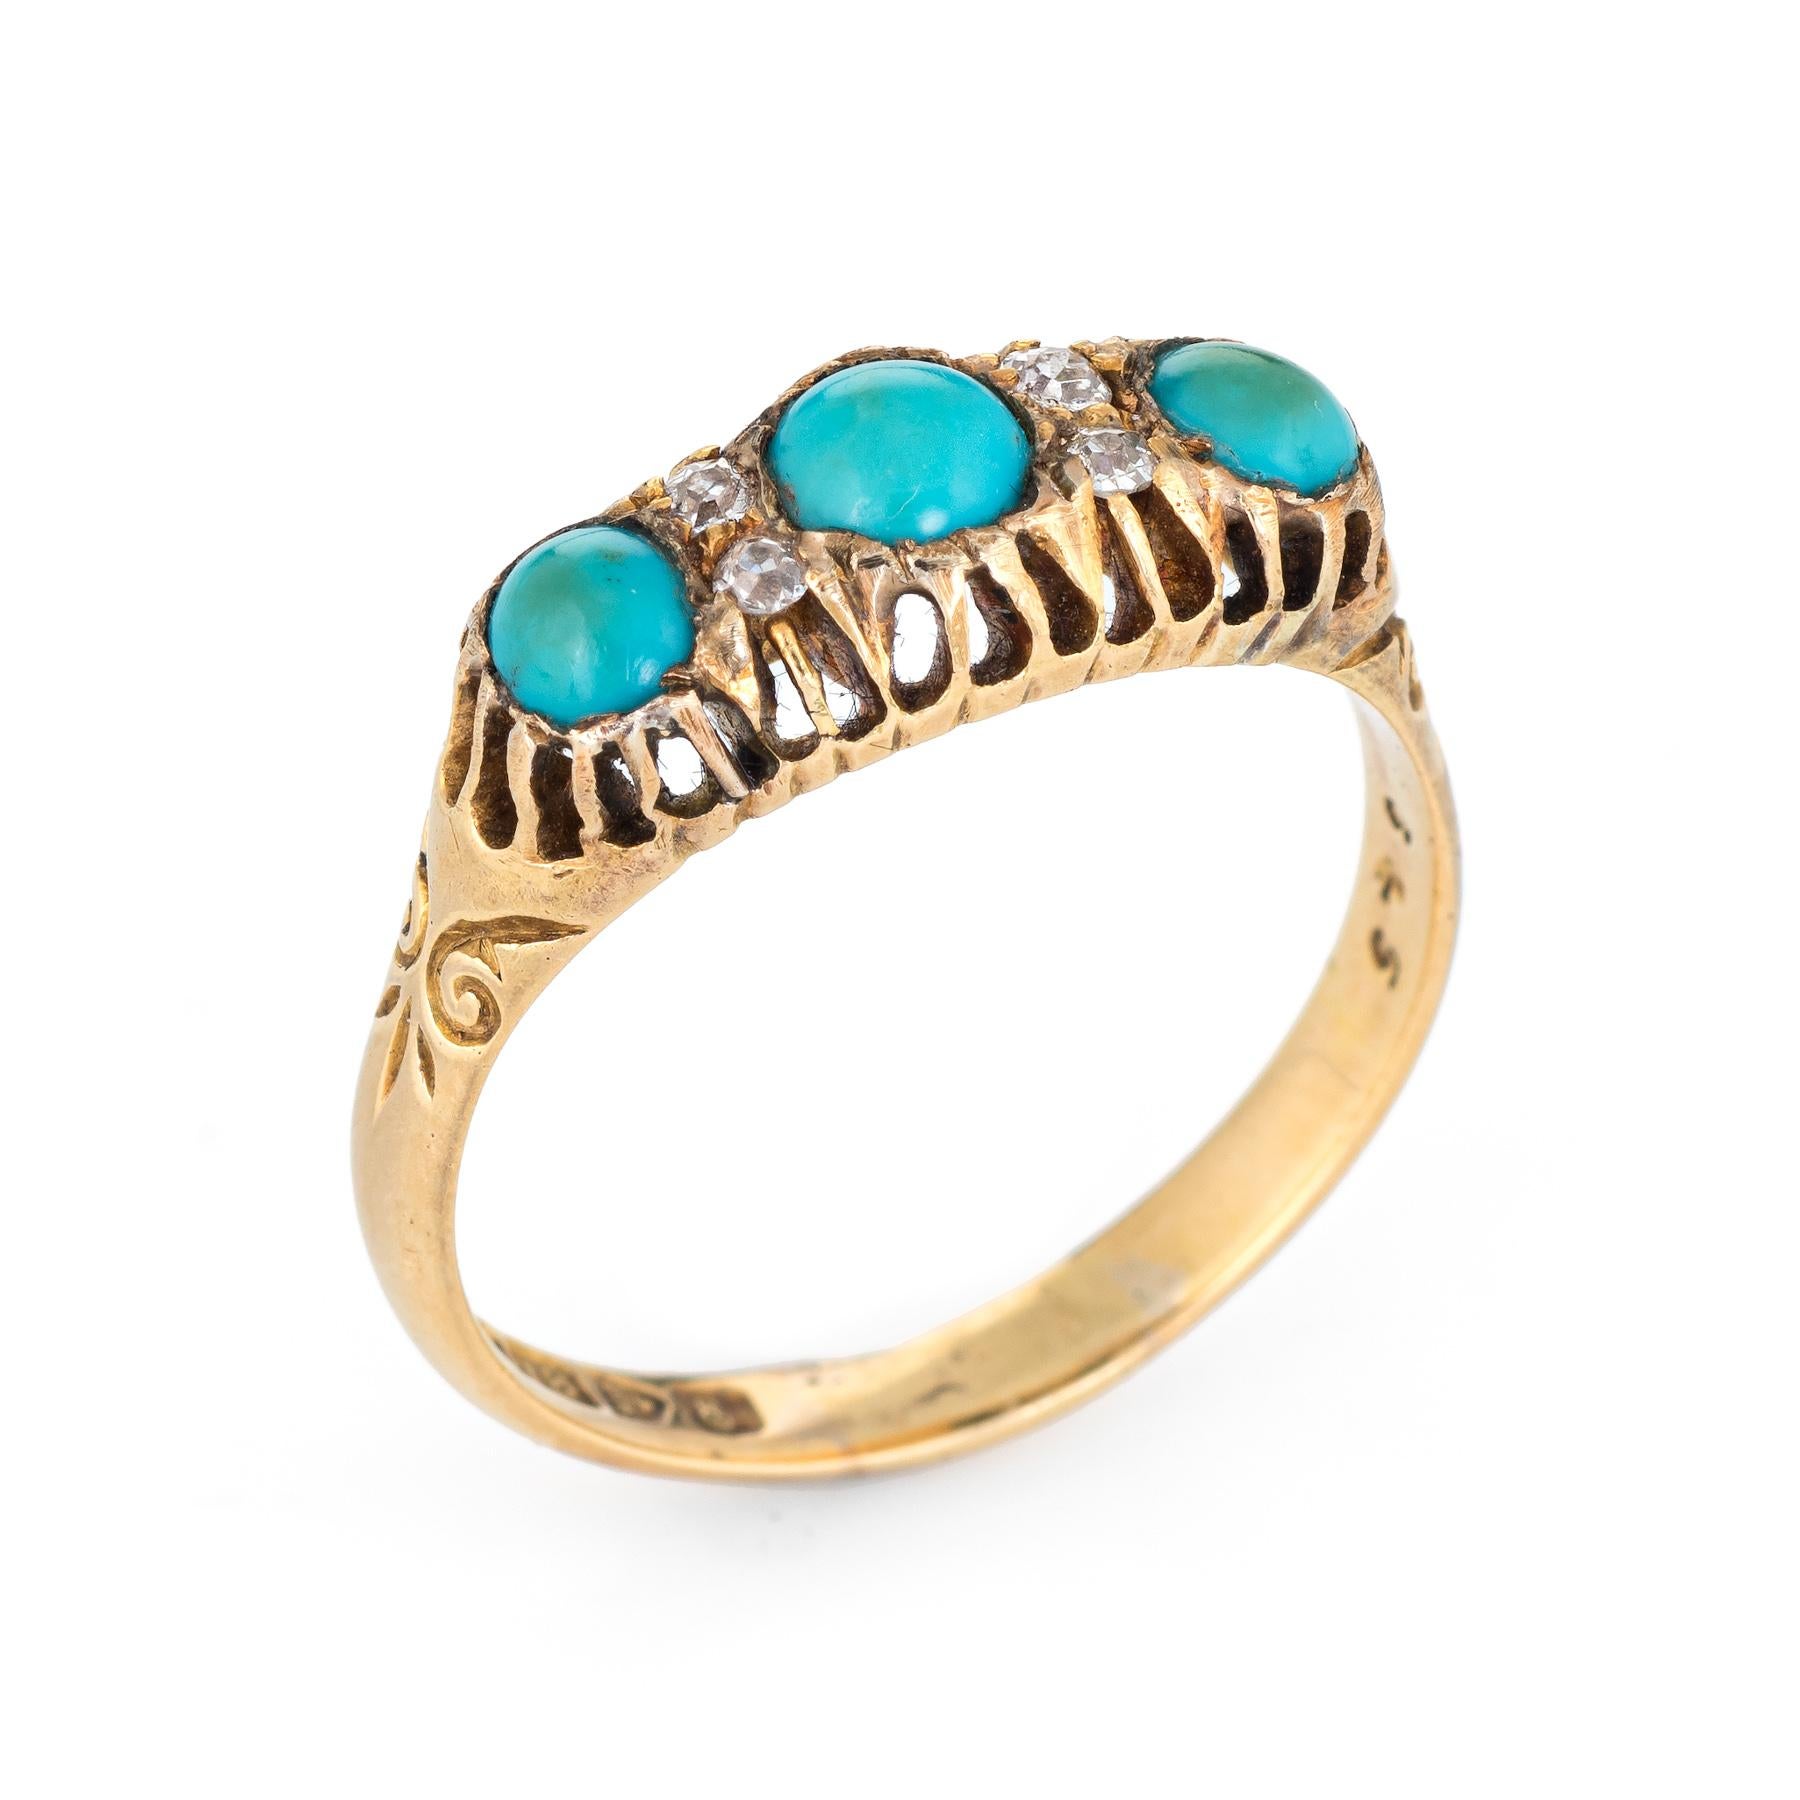 Antique Edwardian era turquoise & diamond ring (circa 1905), crafted in 18 karat yellow gold. 

Three turquoise cabochons measure 4mm to 4.5mm, accented with four estimated 0.03 old mine cut diamonds. The total diamond weight is estimated at 0.12